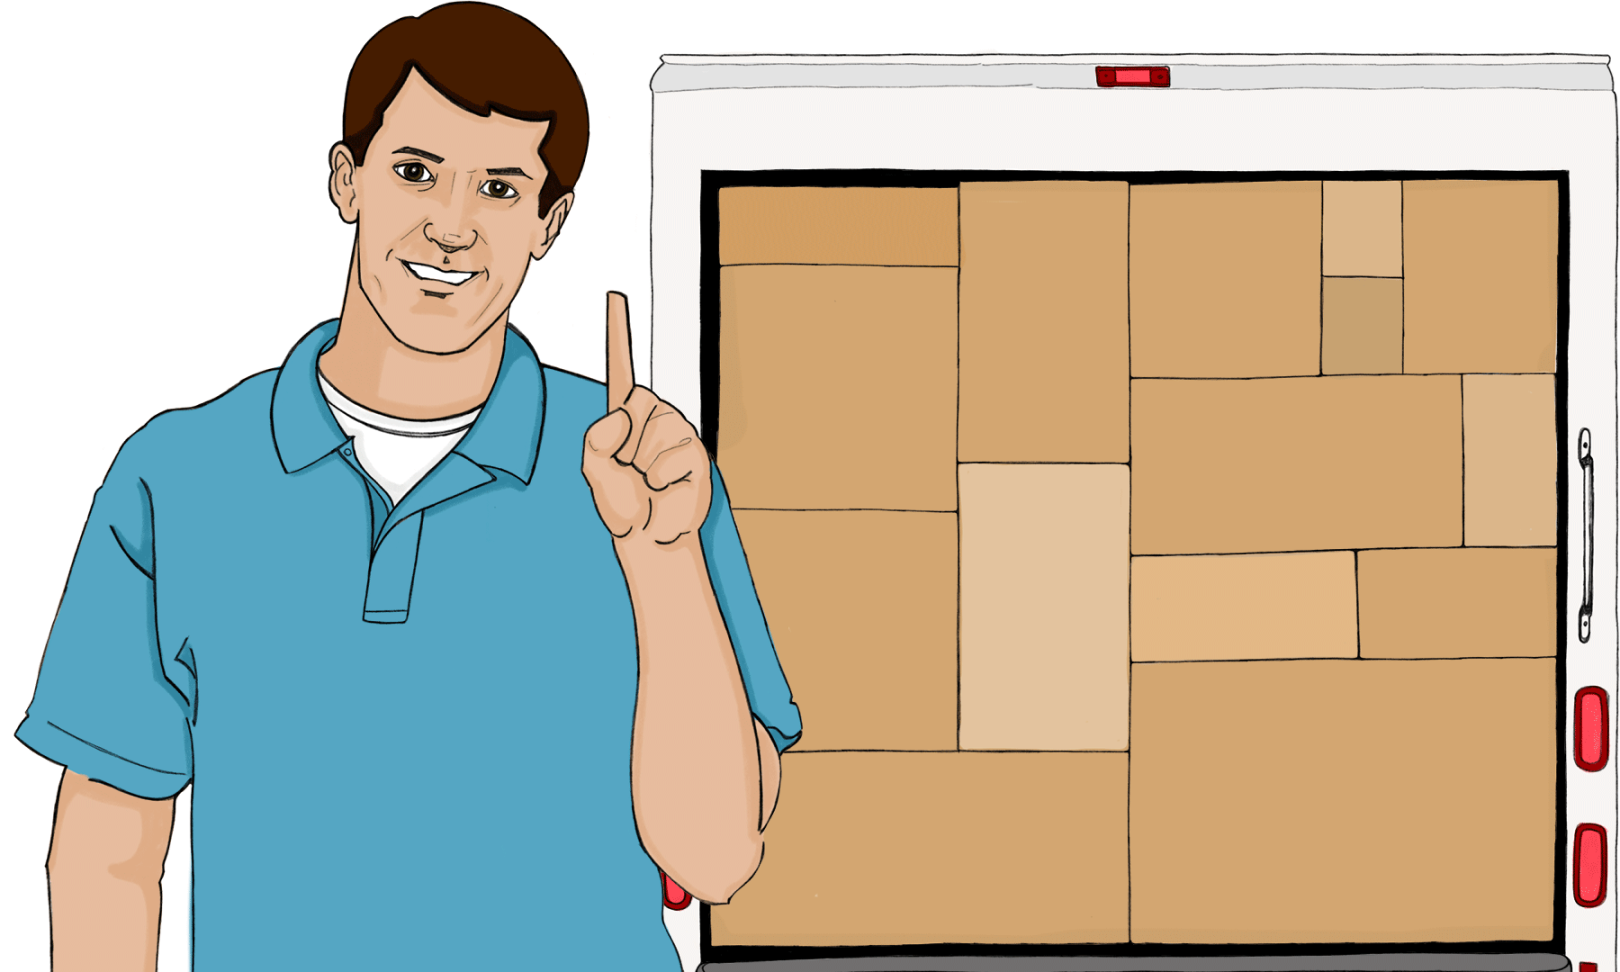 Man holding up finger standing in front of moving truc